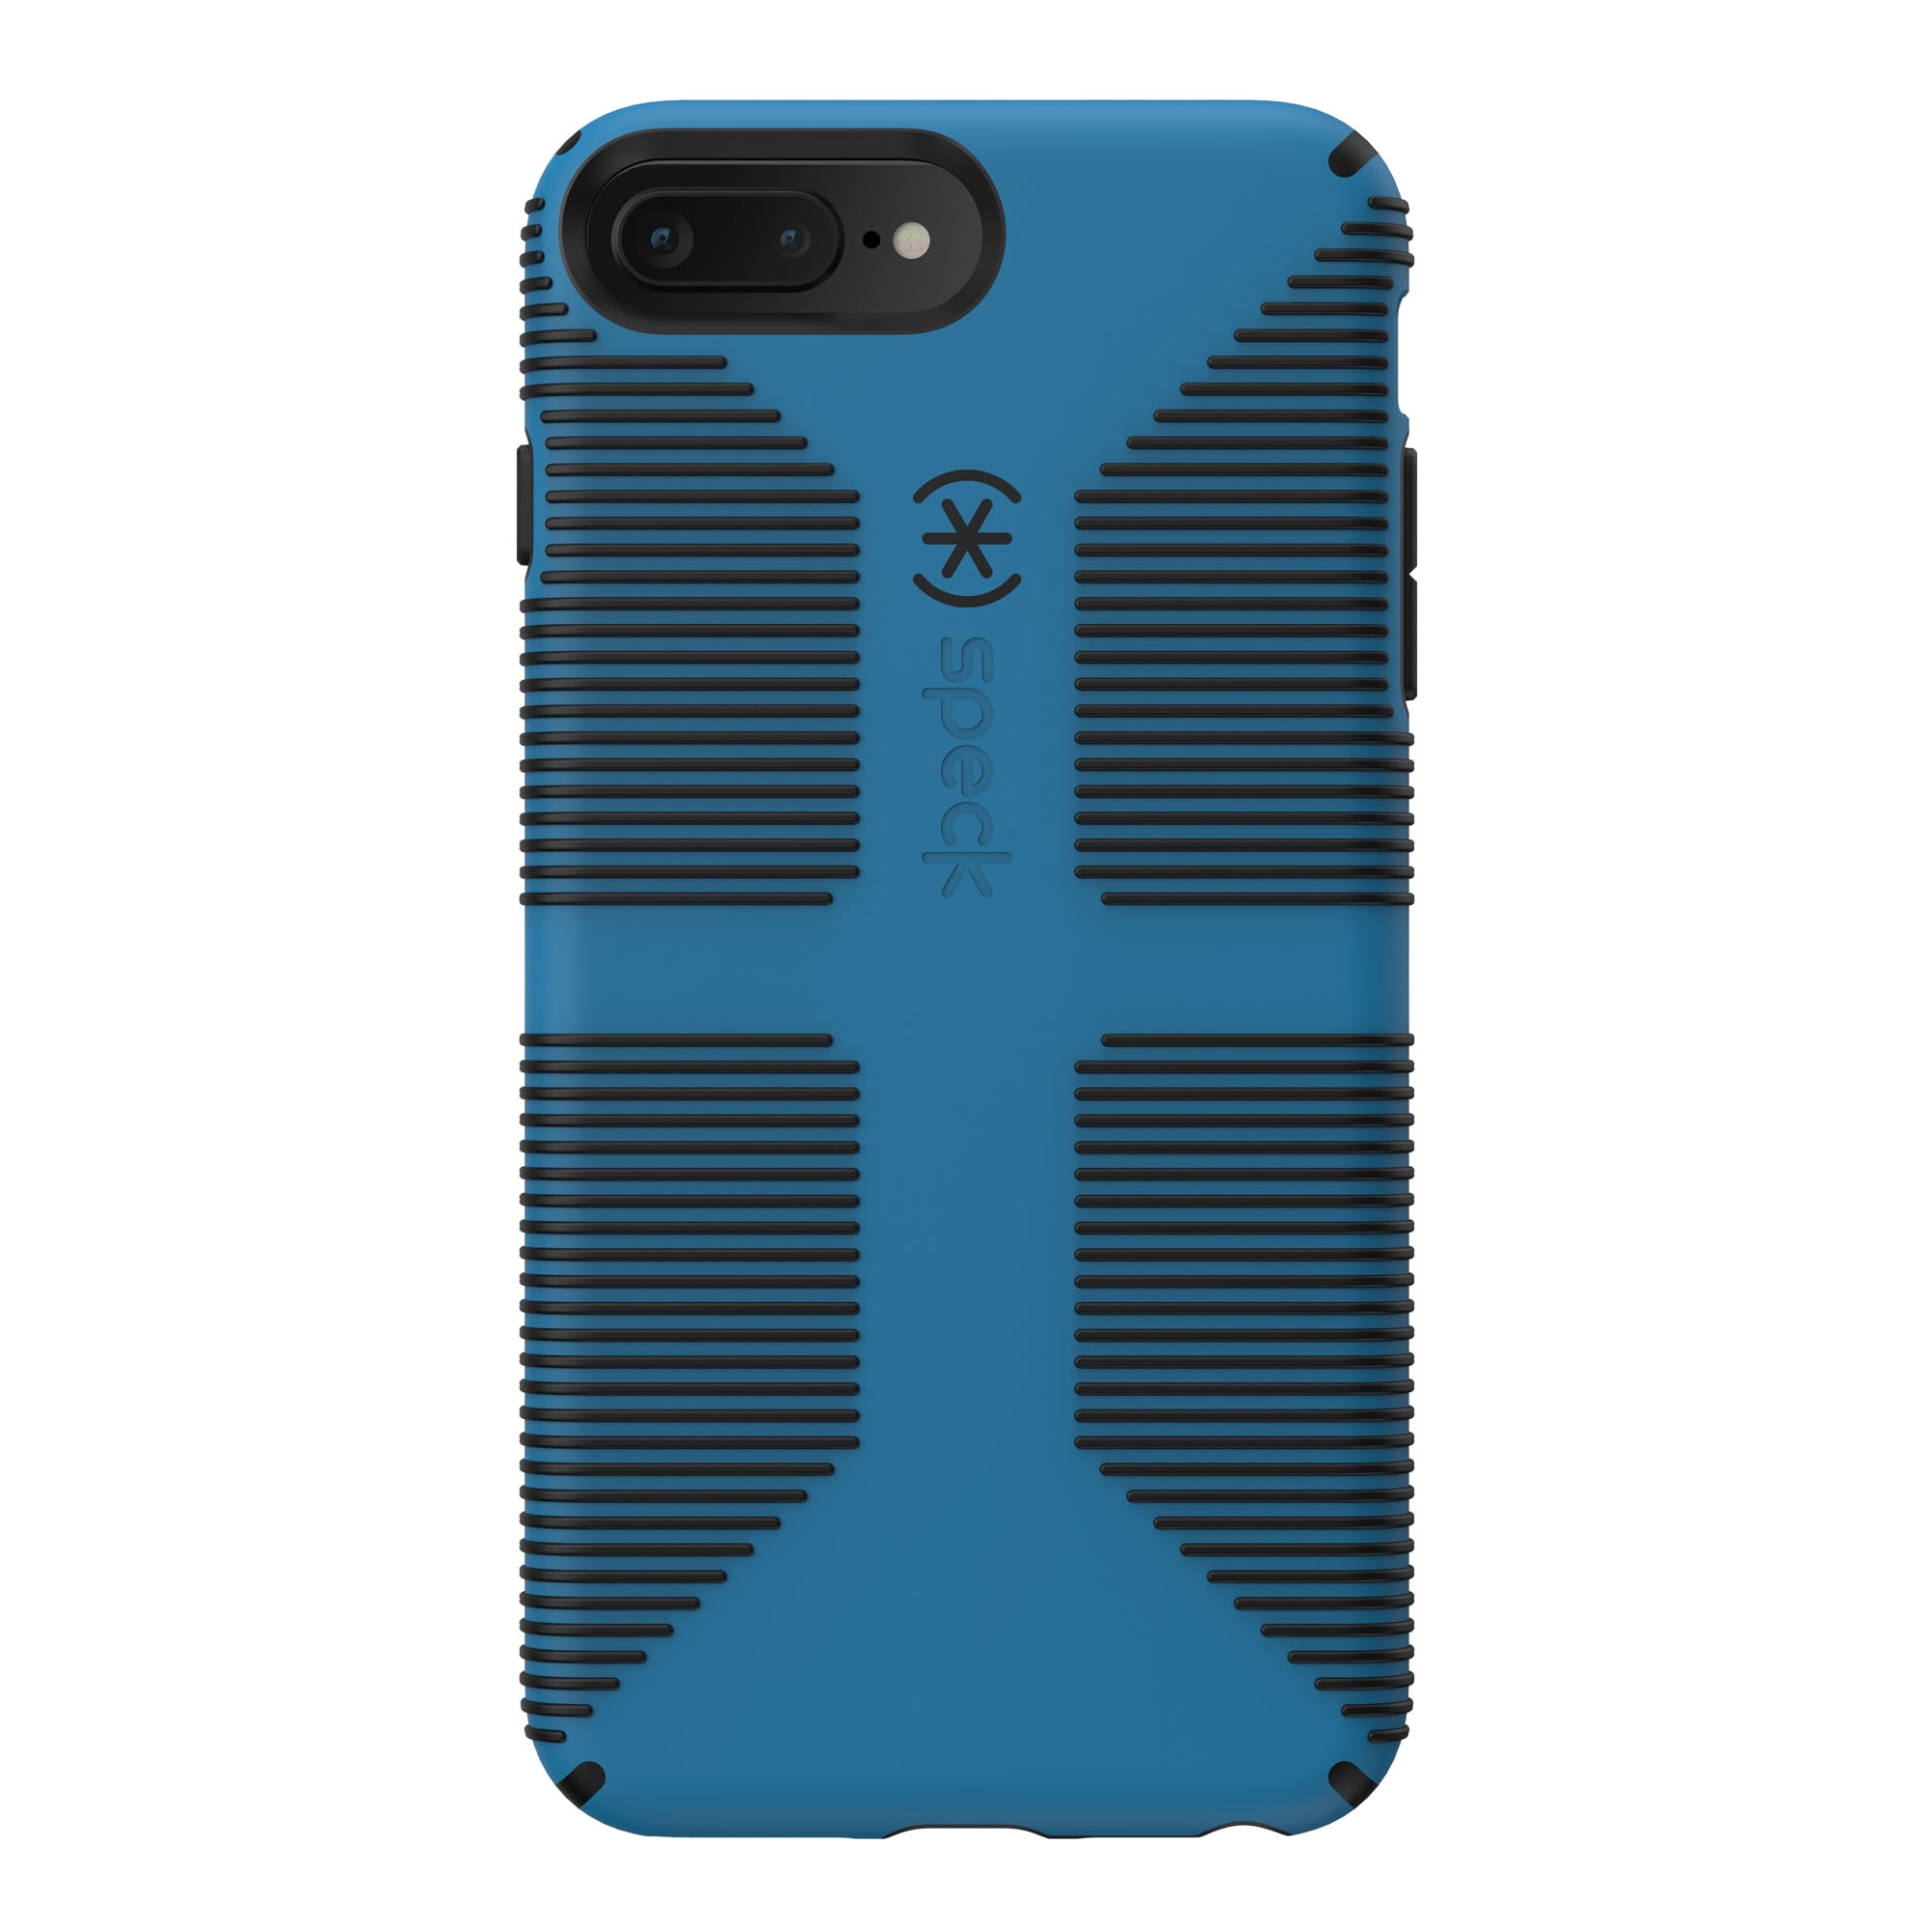 Speck iPhone 8, 7, 6, and SE Plus Candyshell Grip in Varsity Blue/Black